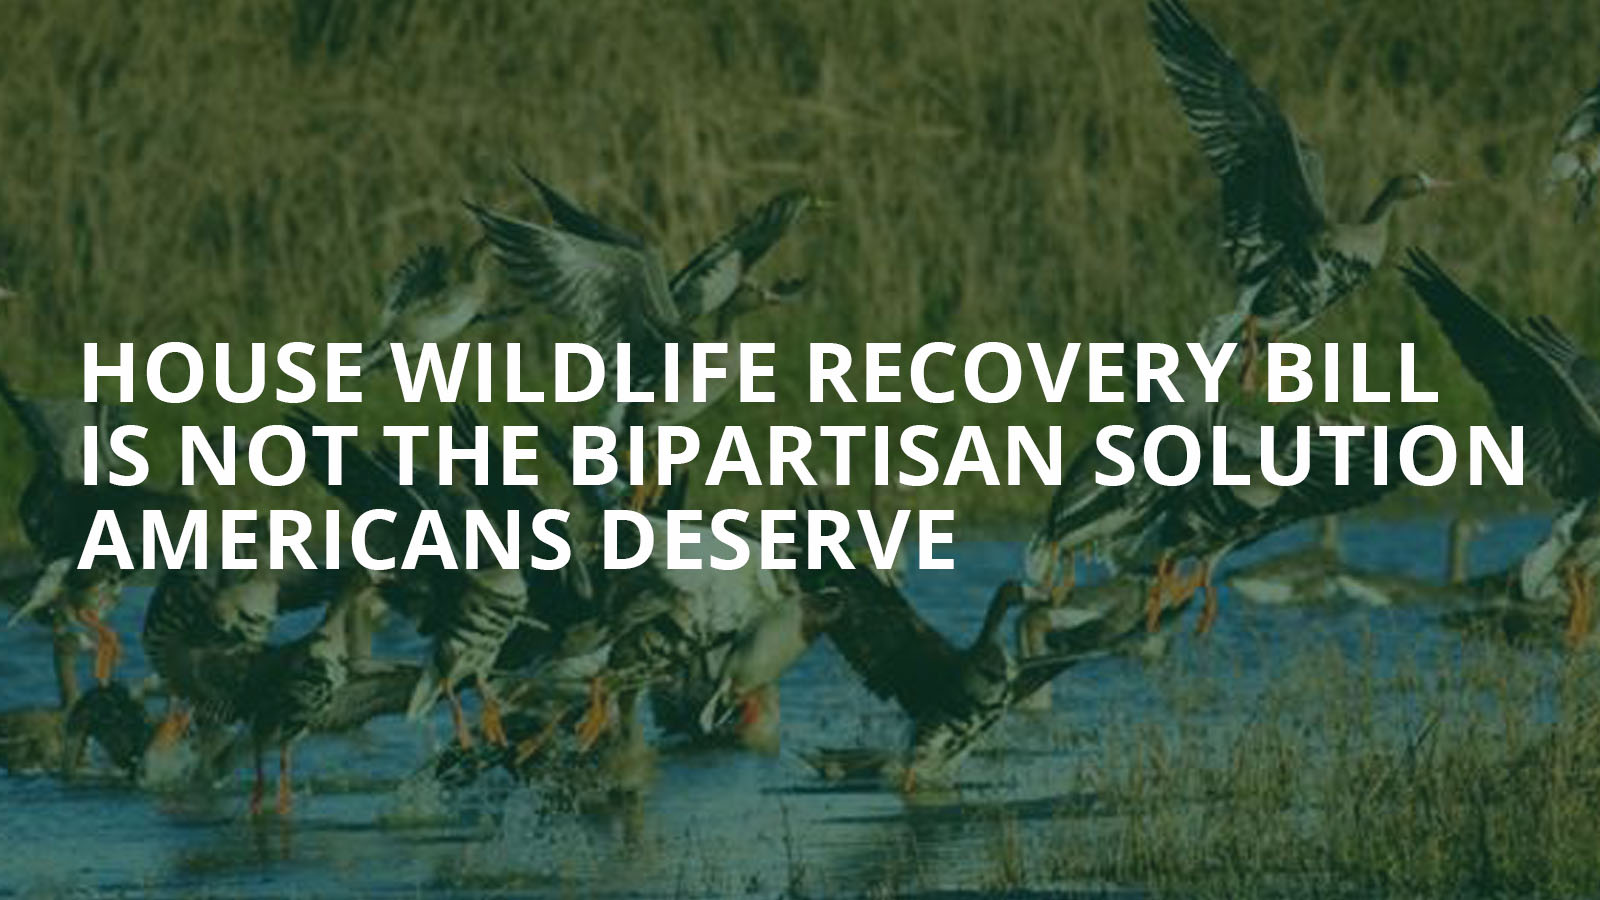 BRANDED: House wildlife recovery bill is not the bipartisan solution Americans deserve